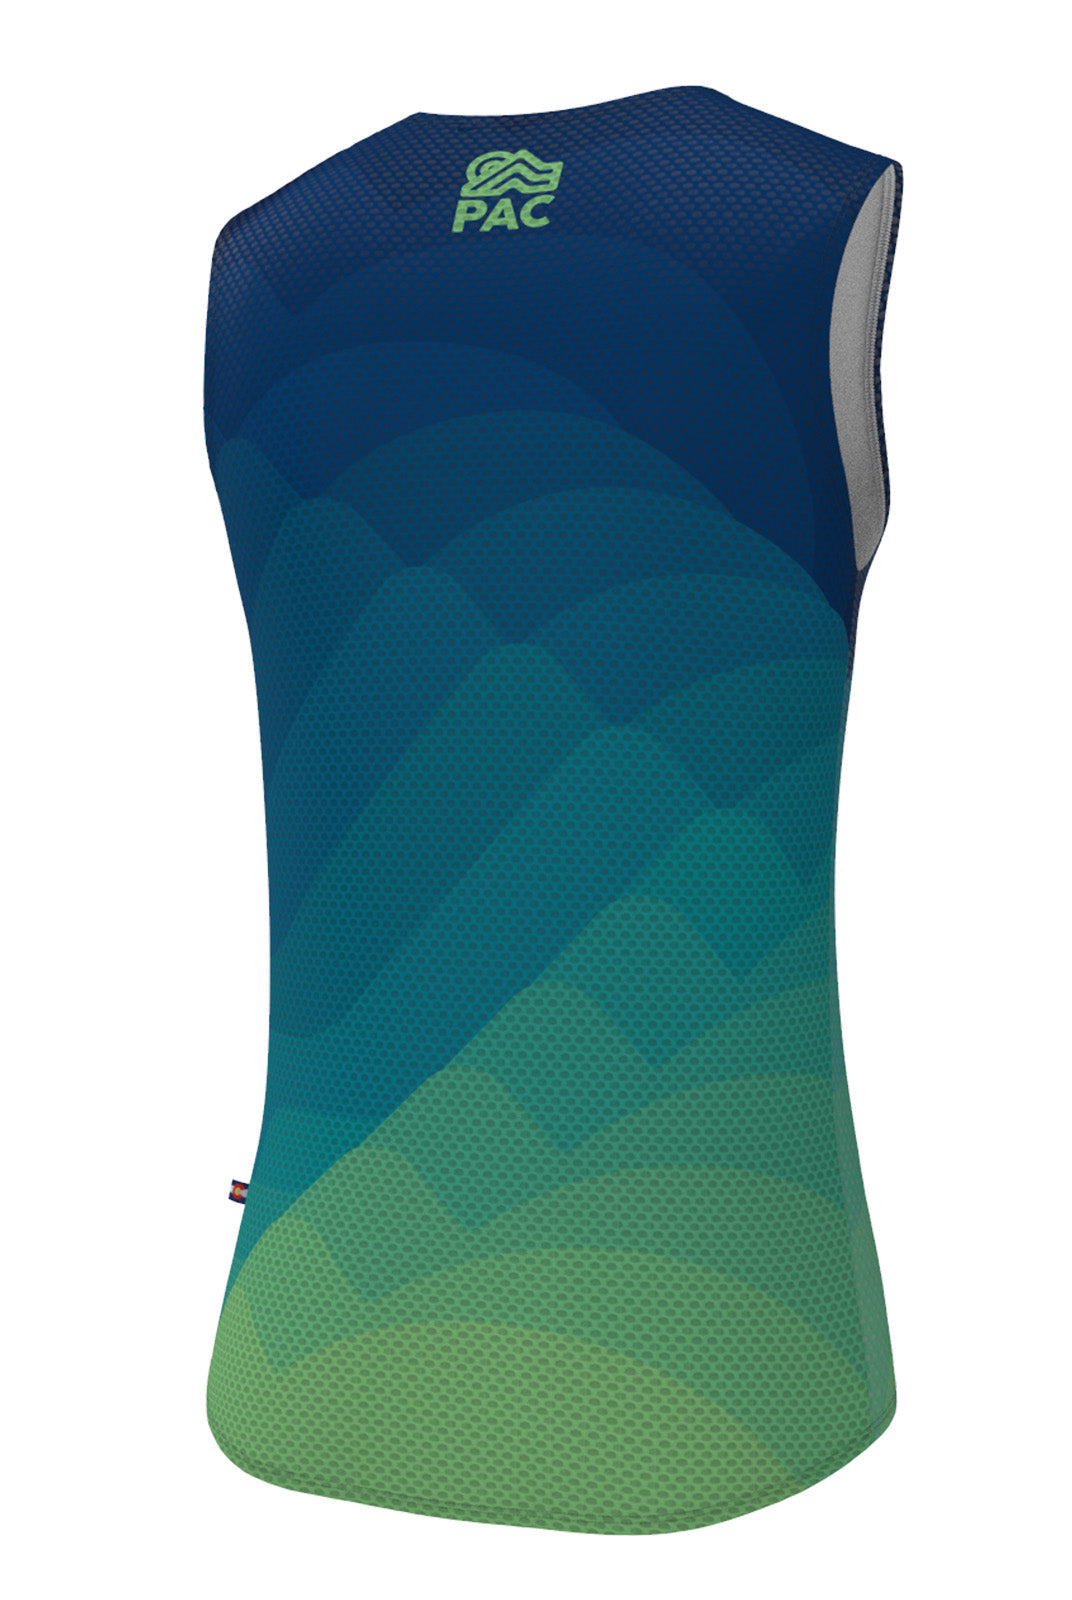 Men's PAC Sleeveless Base Layer - Twighlight Back View